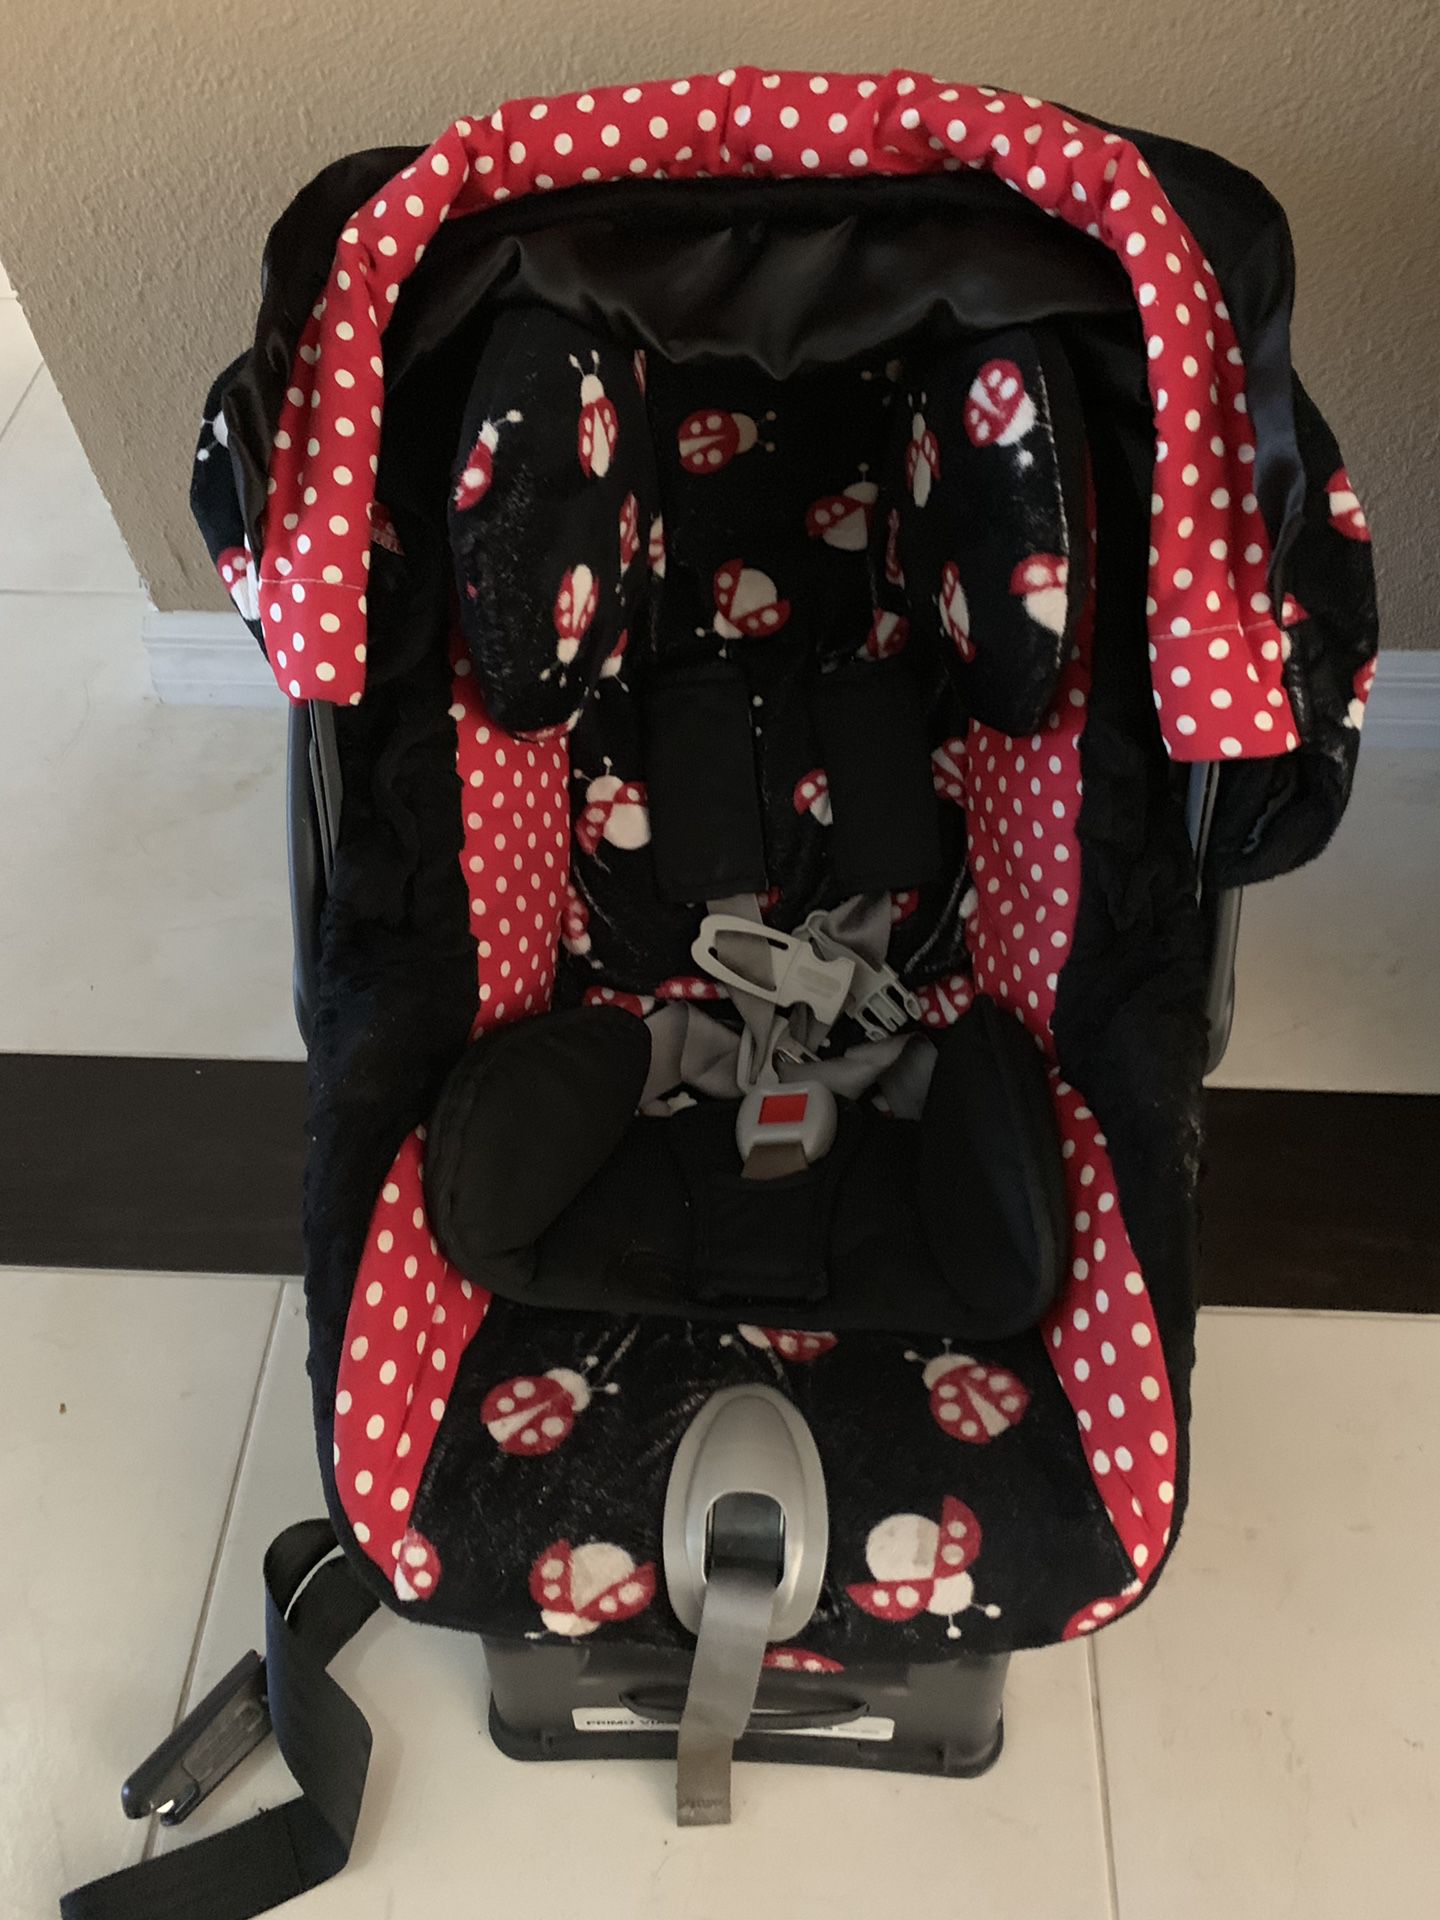 Peg Perego infant car seat with custom cover